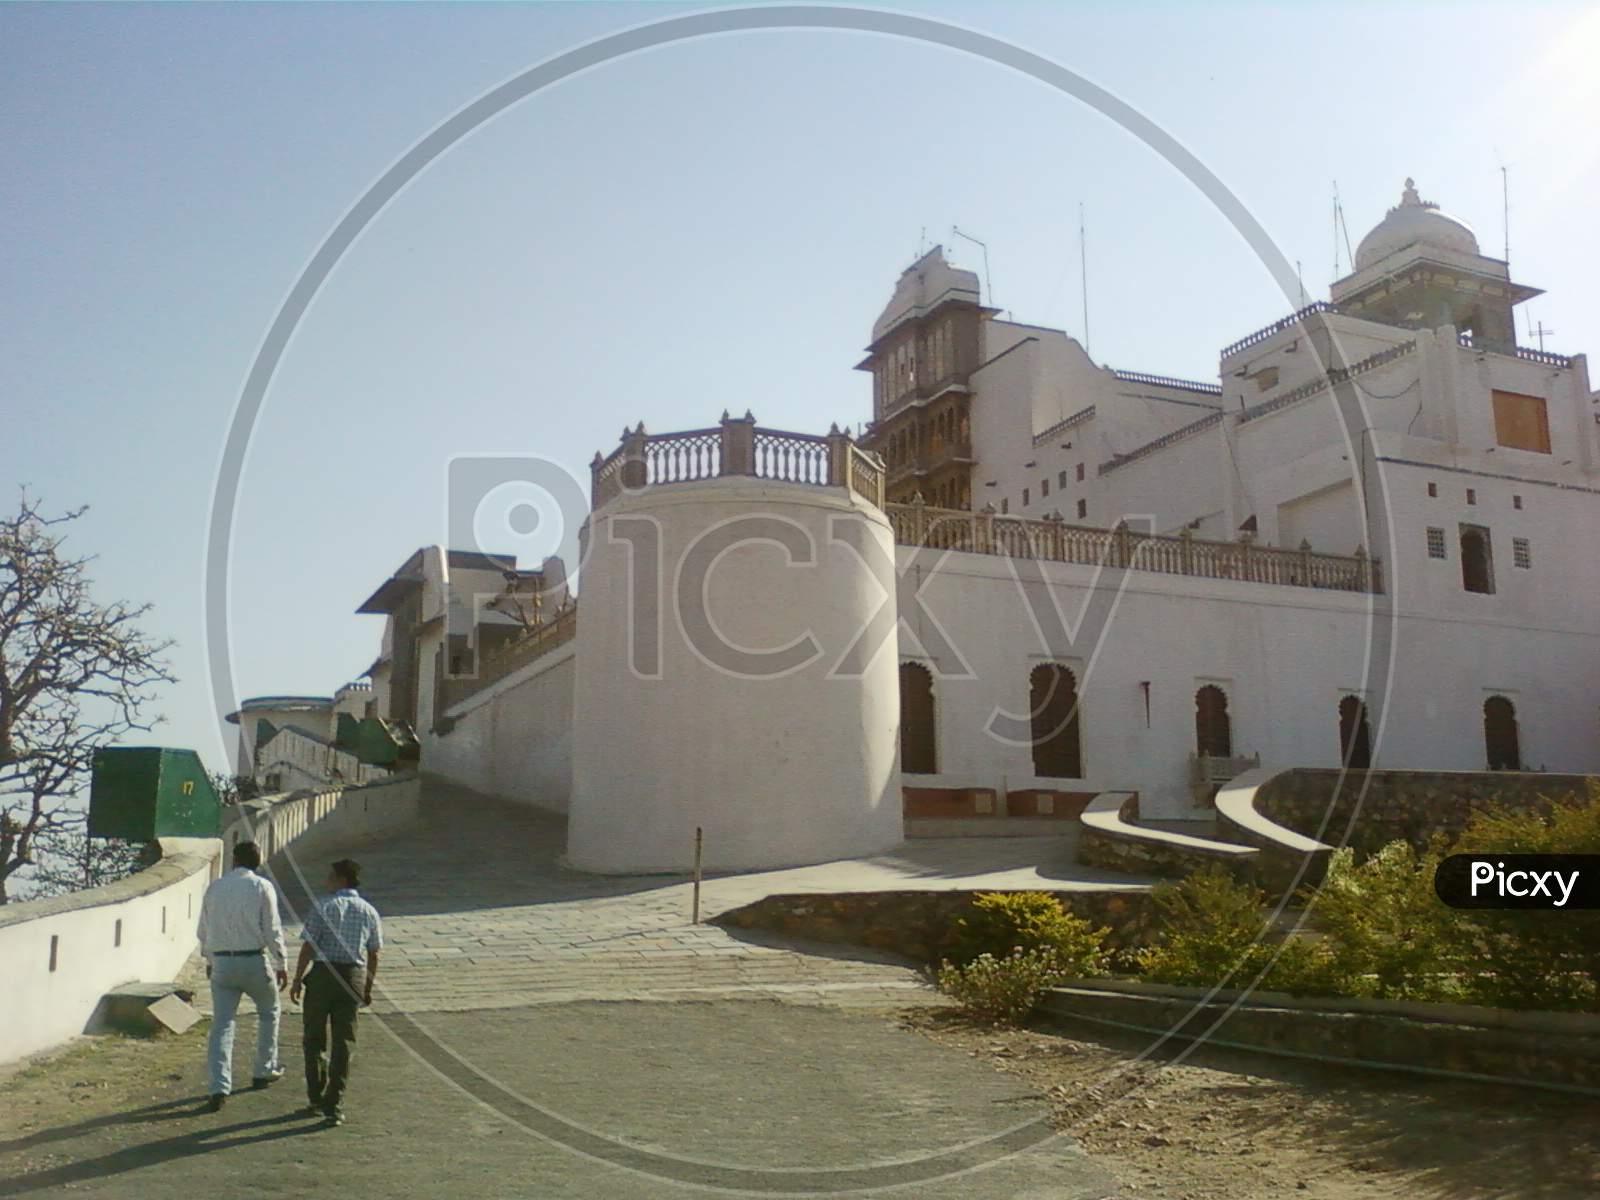 view of monsoon palace, Udaipur